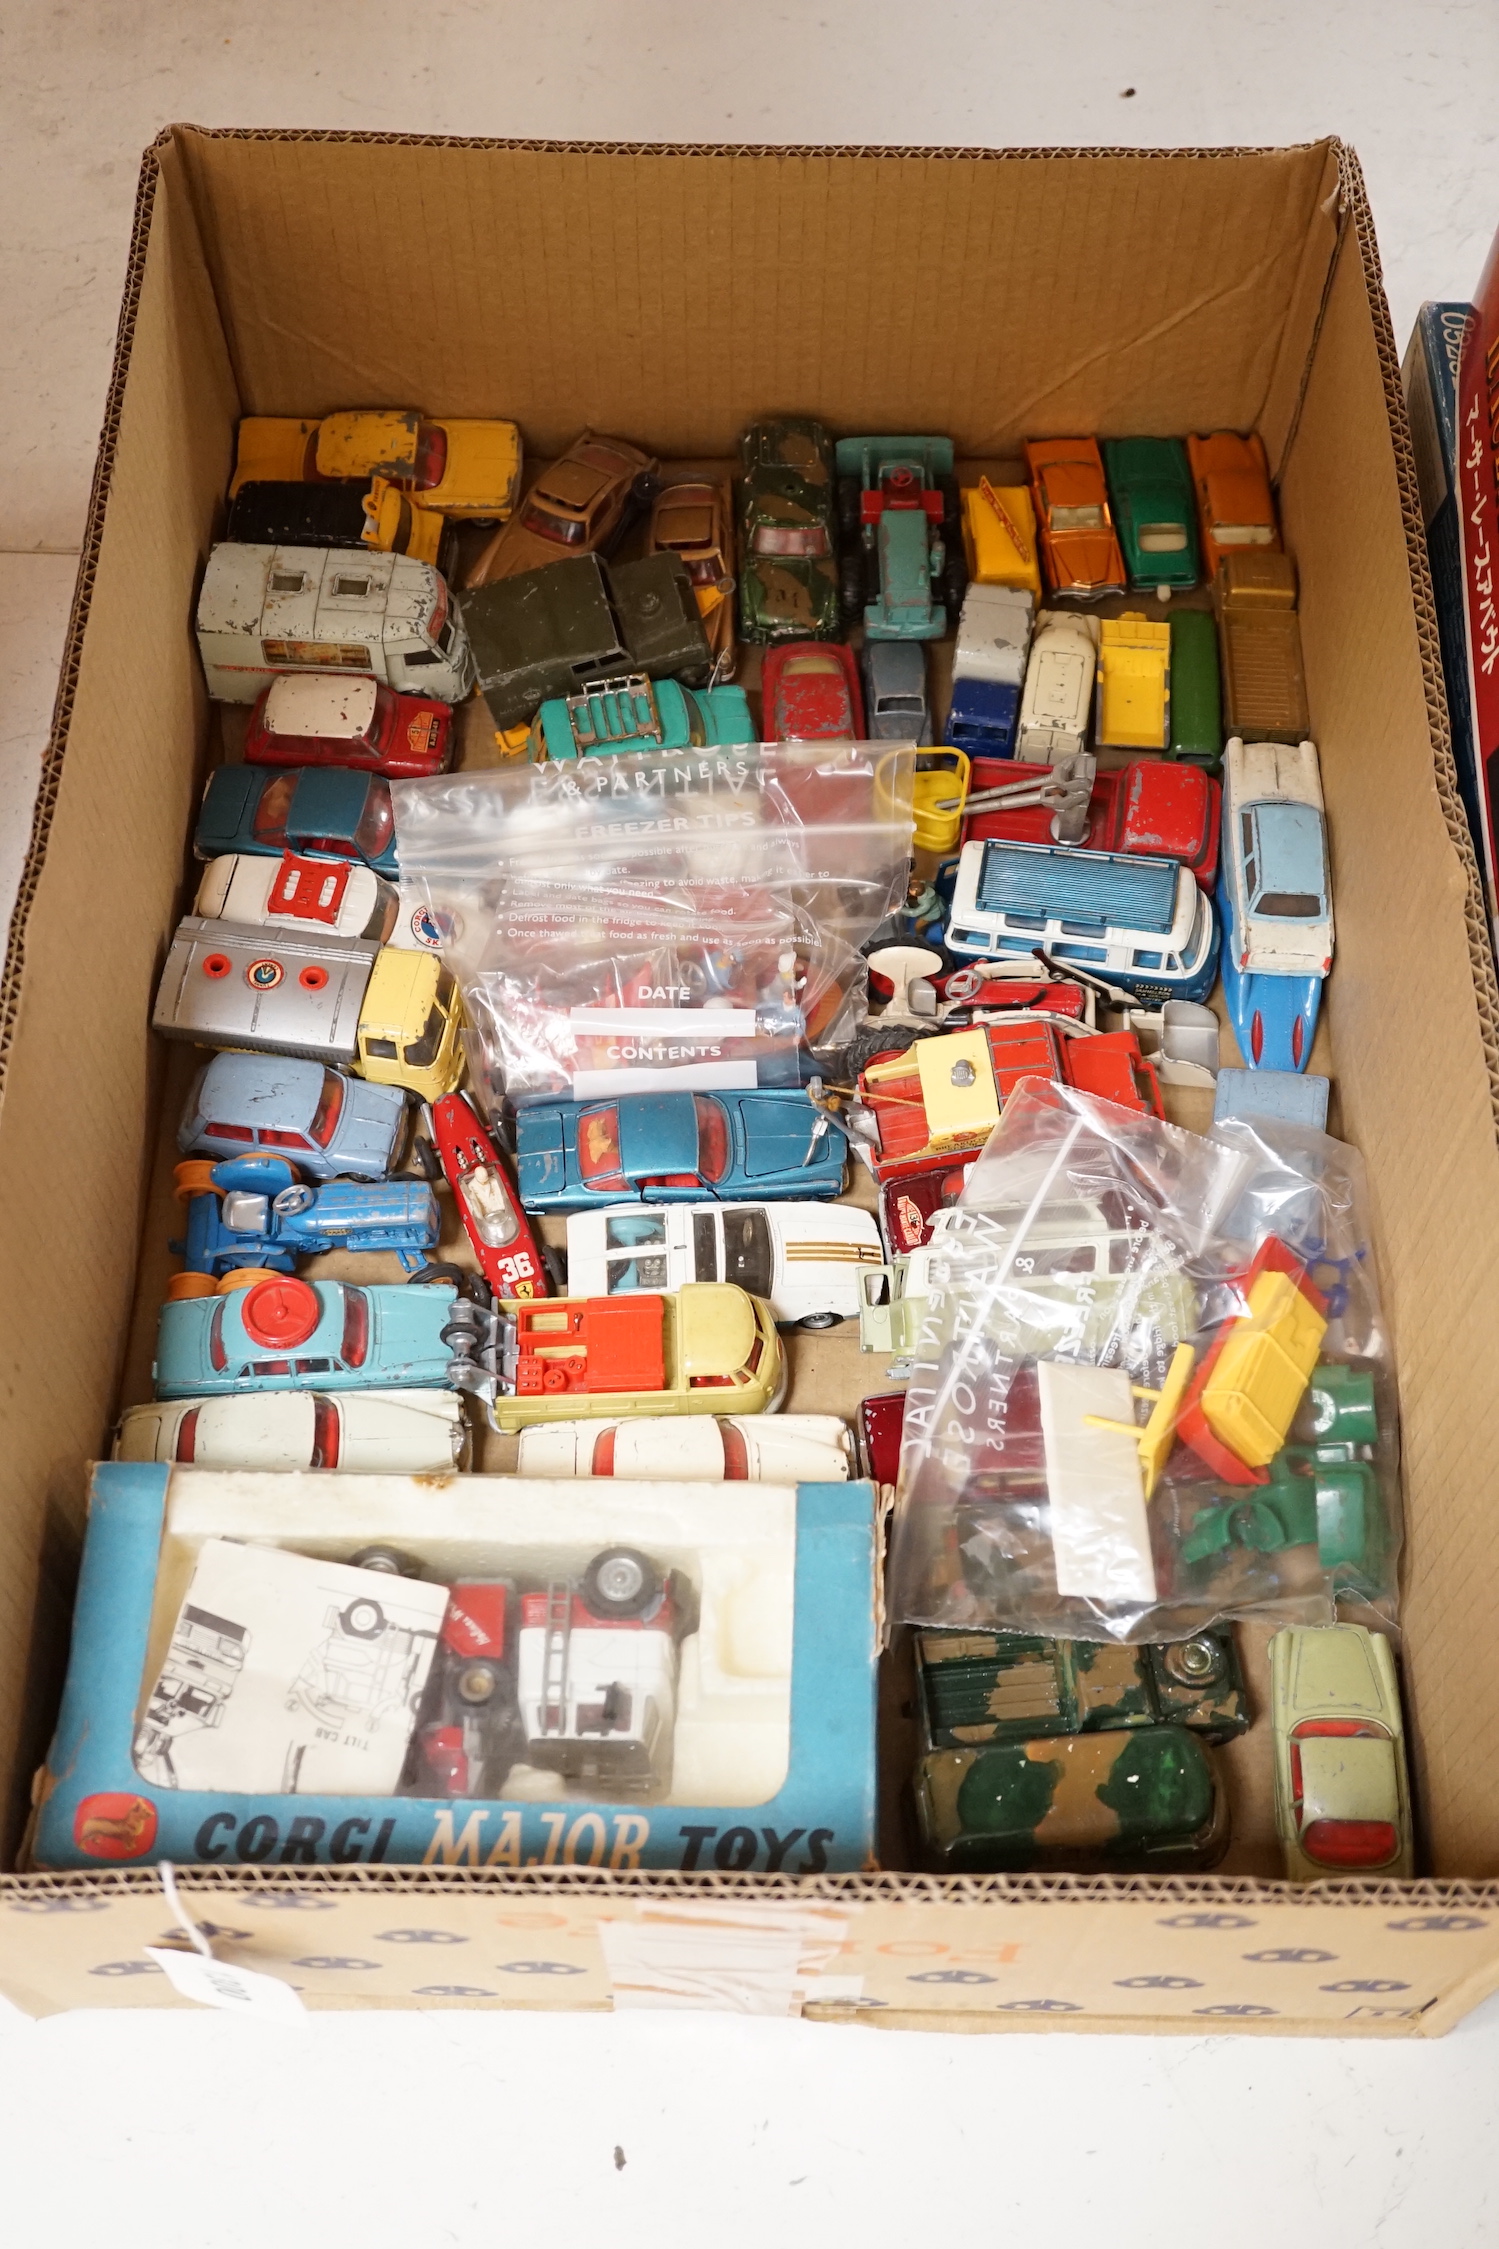 A collection of 1960's and 70's Corgi and Matchbox diecast vehicles (70+) many for restoration, including two James Bond 007 Aston Martin DB5 cars in gold finish, a Chitty Chitty Bang Bang, a boxed Corgi Major Toys Holme